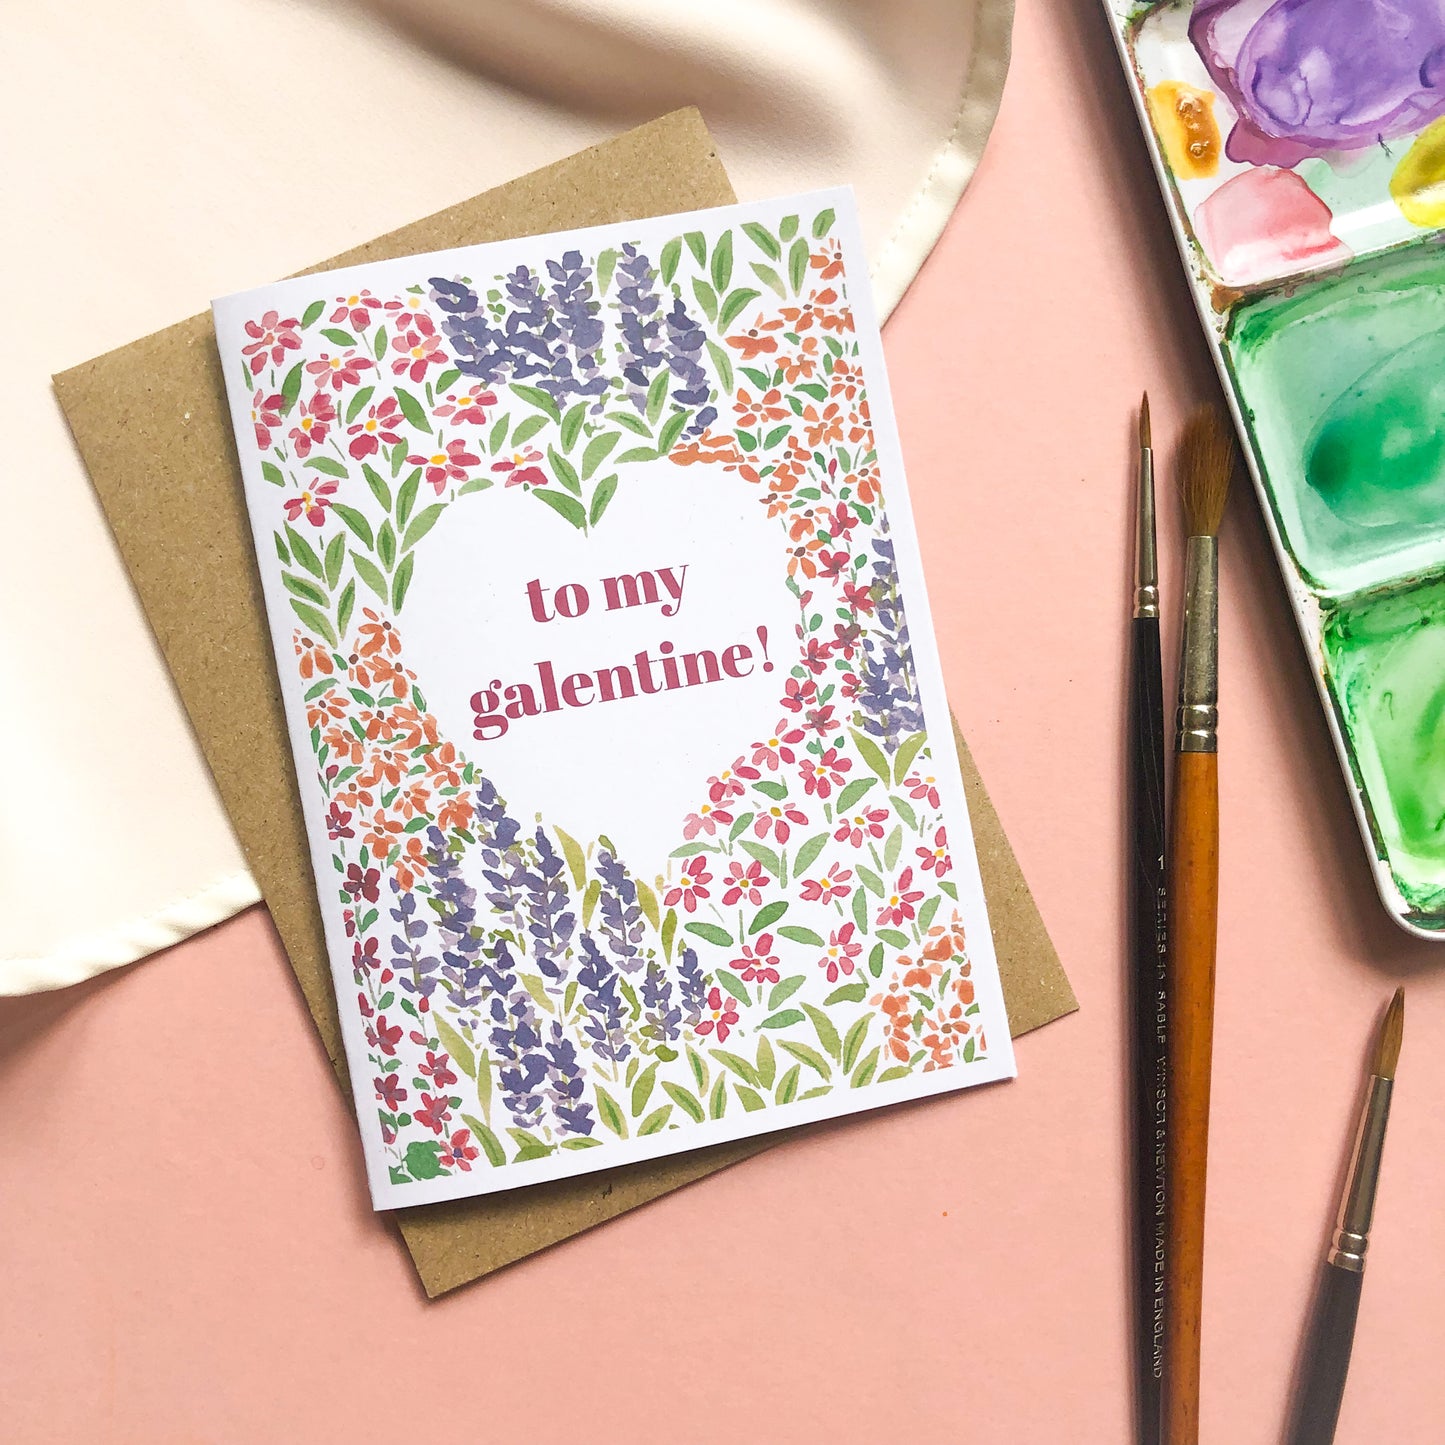 To My Galentine! Floral Valentine's Day Card for Female Friend